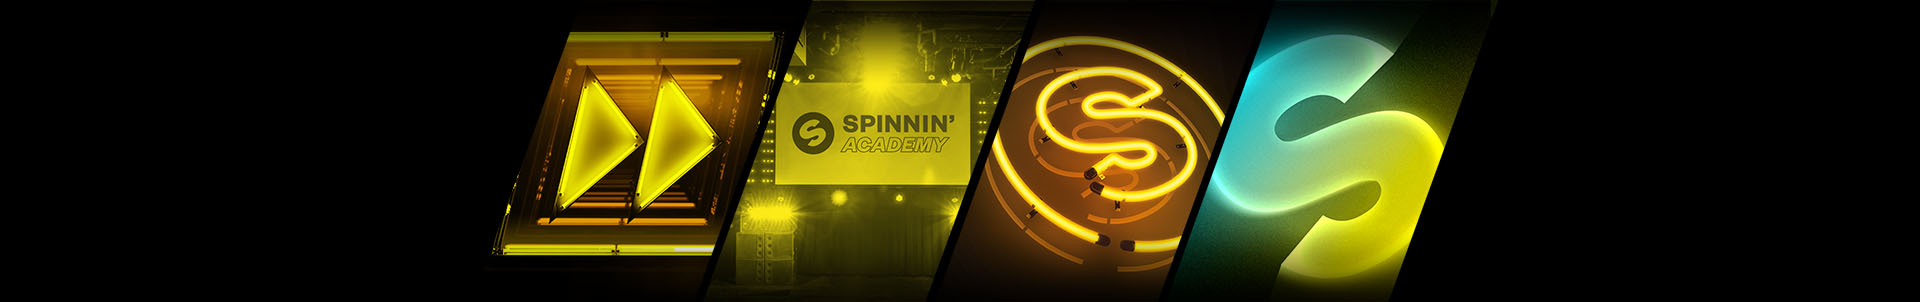 VIDEO: This is Spinnin's ADE aftermovie